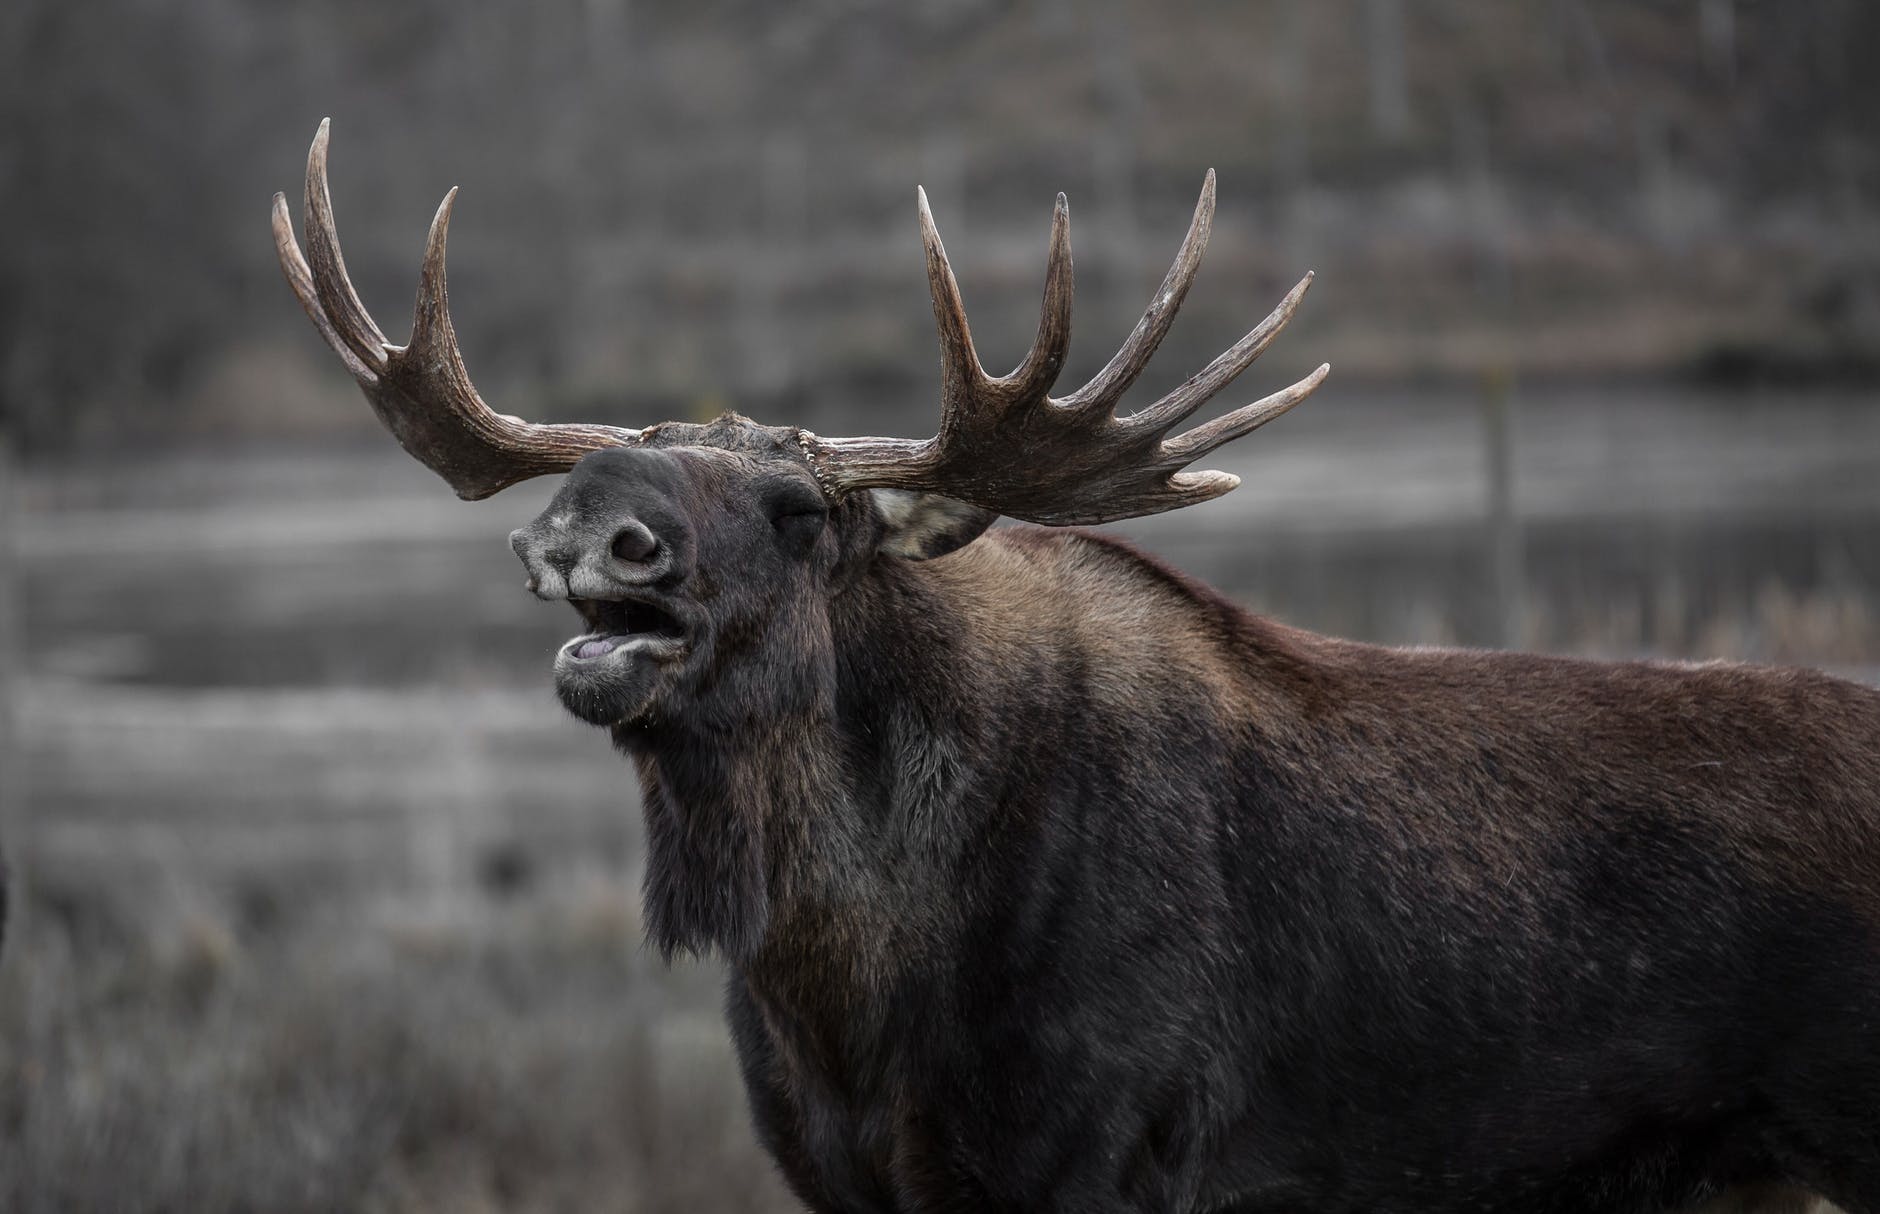 A moose broke into a classroom without warning and caused the evacuation of children